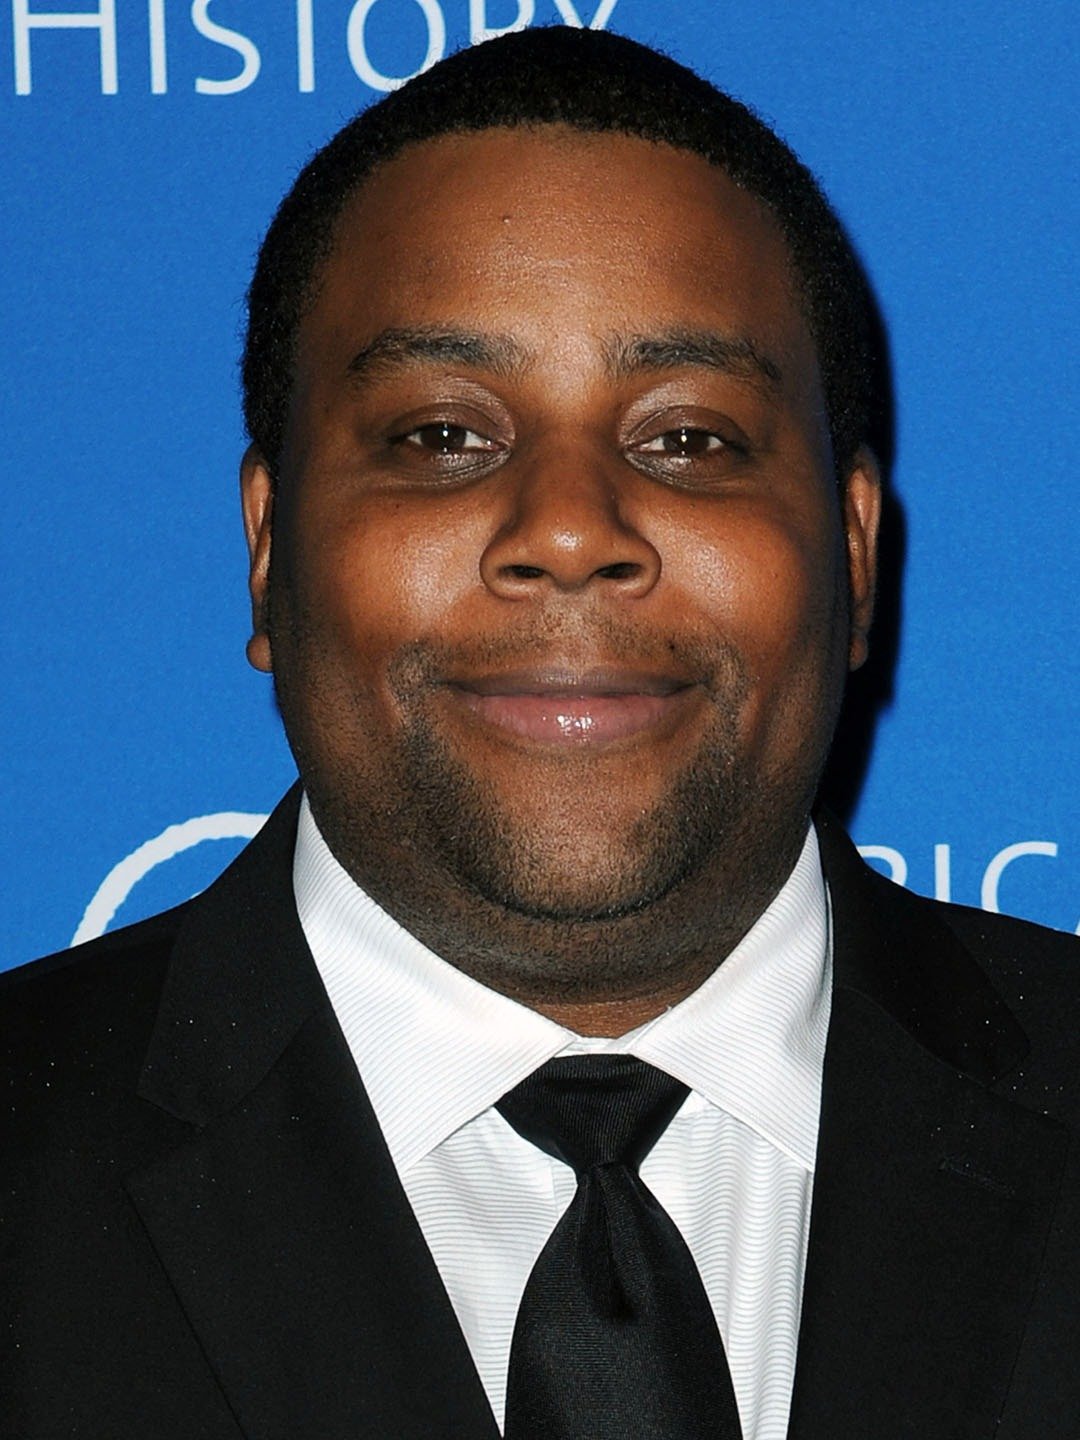 How tall is Kenan Thompson?